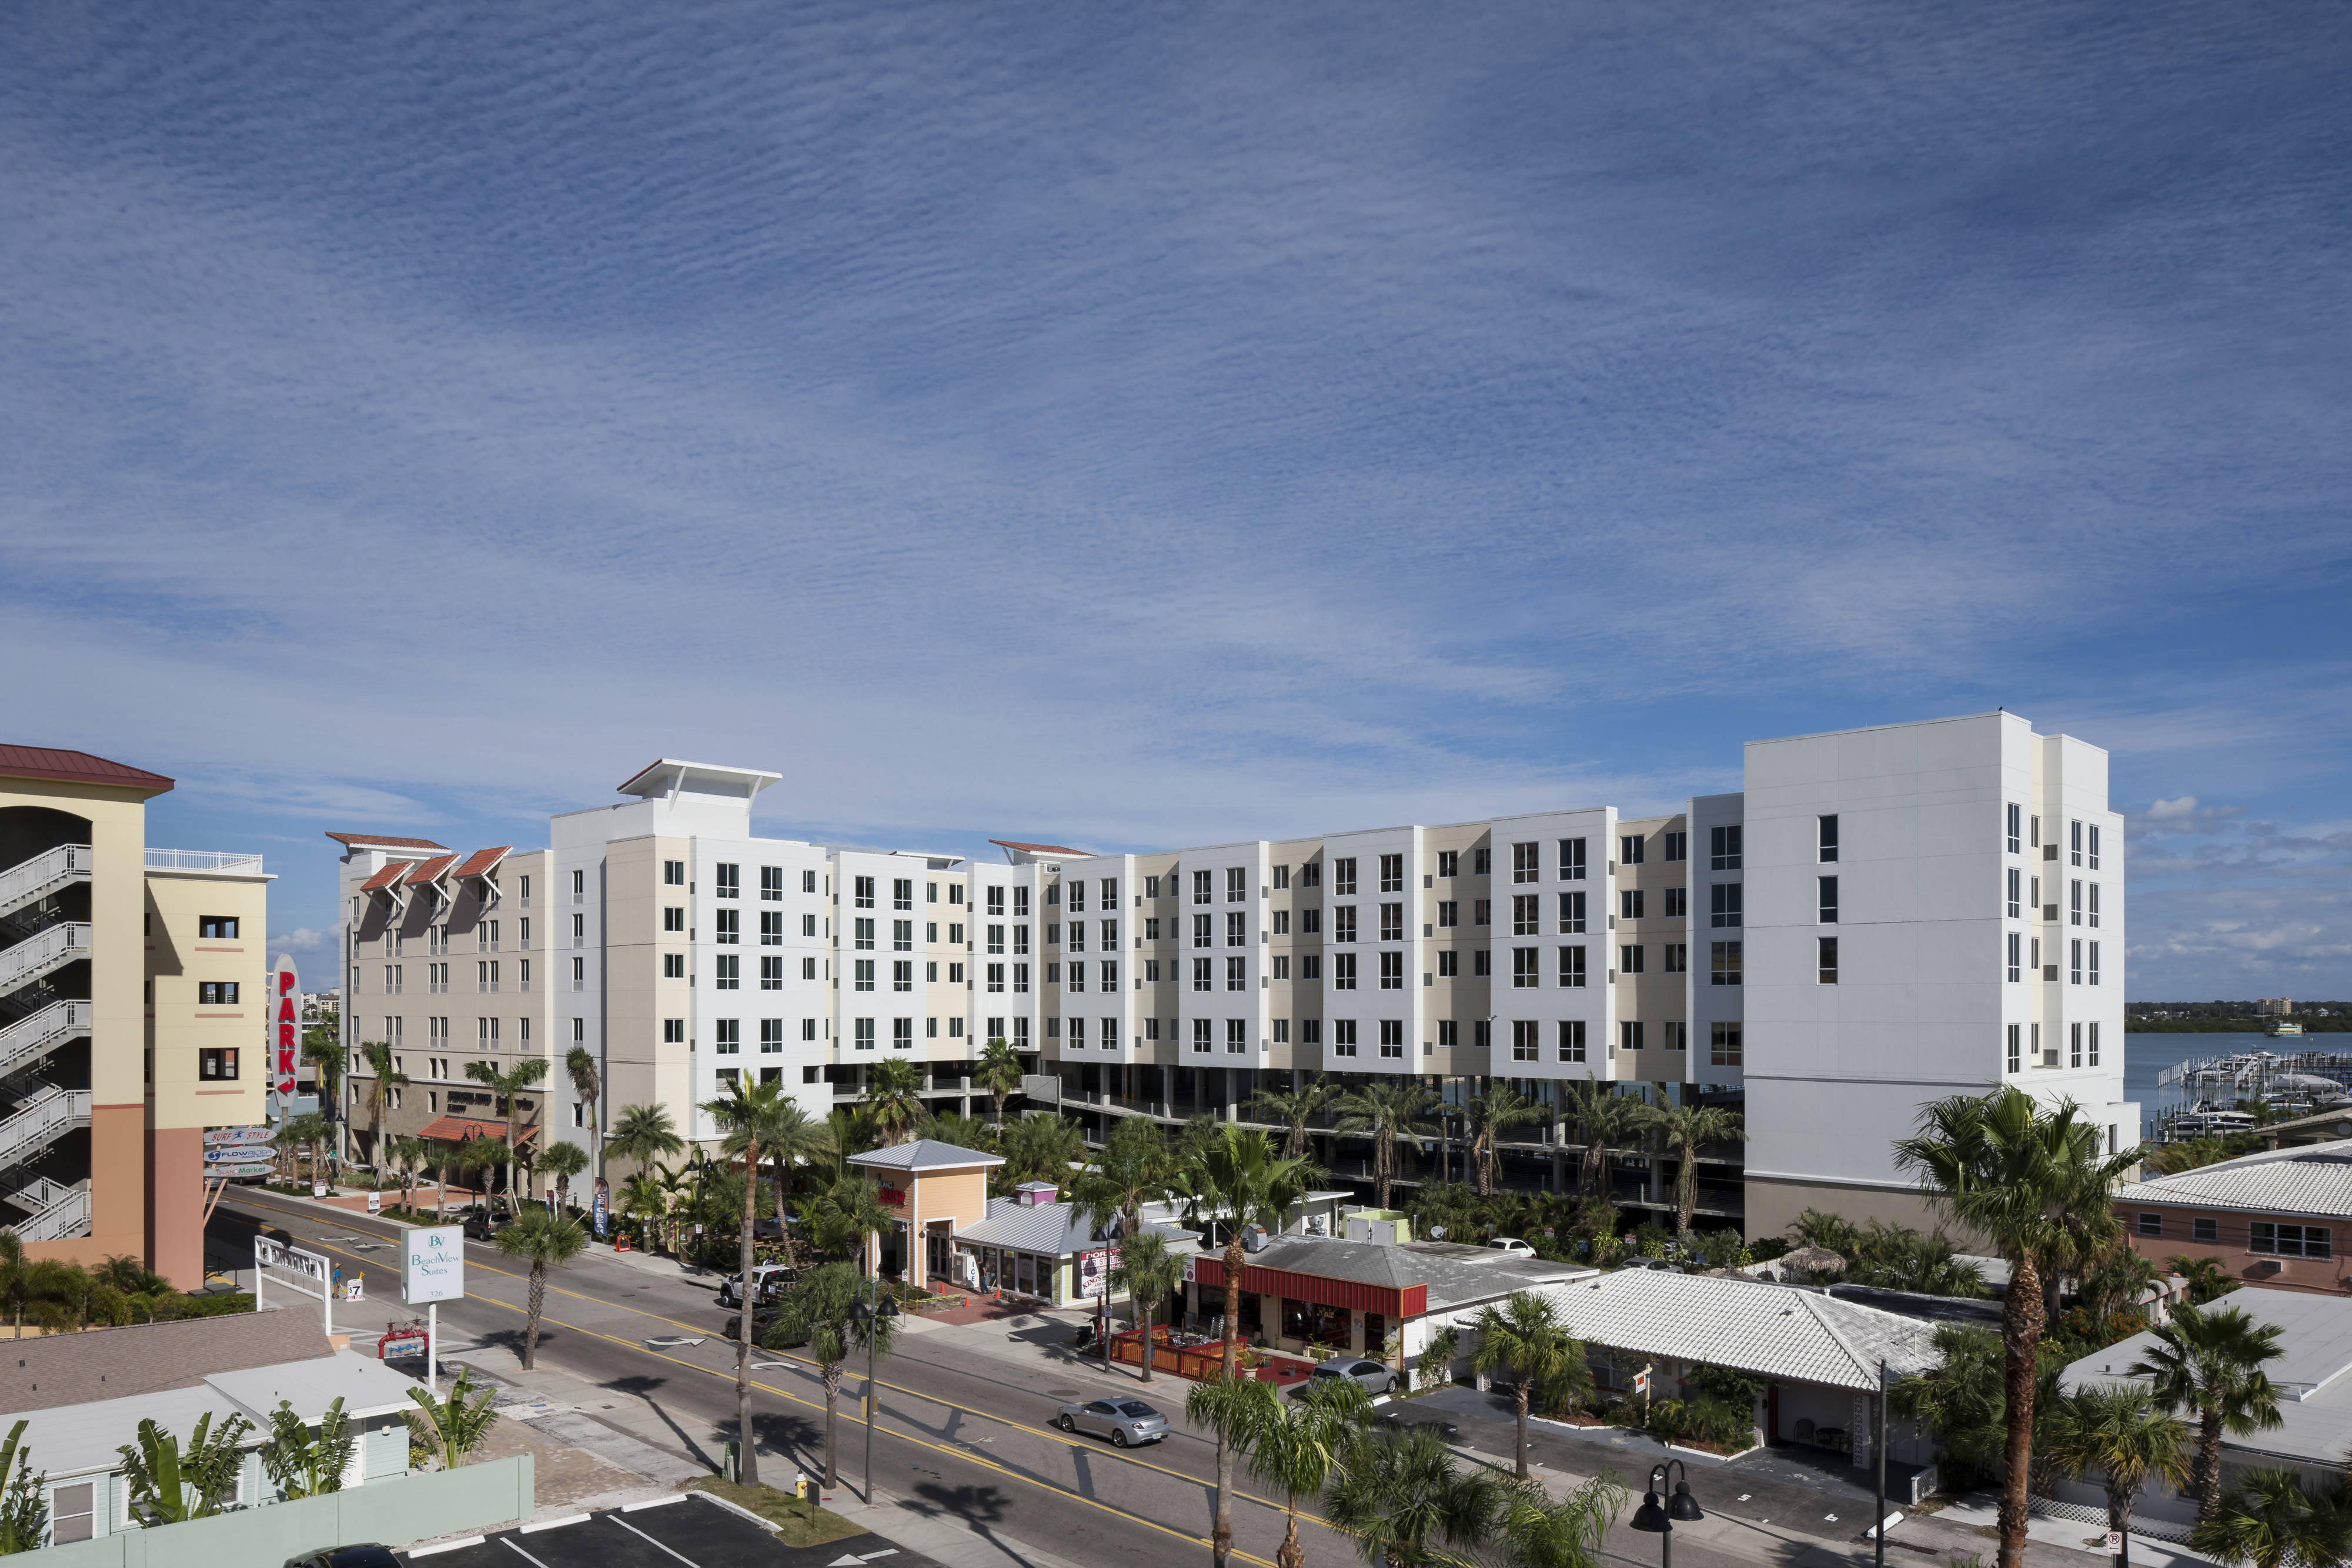 Photo of SpringHill Suites by Marriott Clearwater Beach, Clearwater Beach, FL